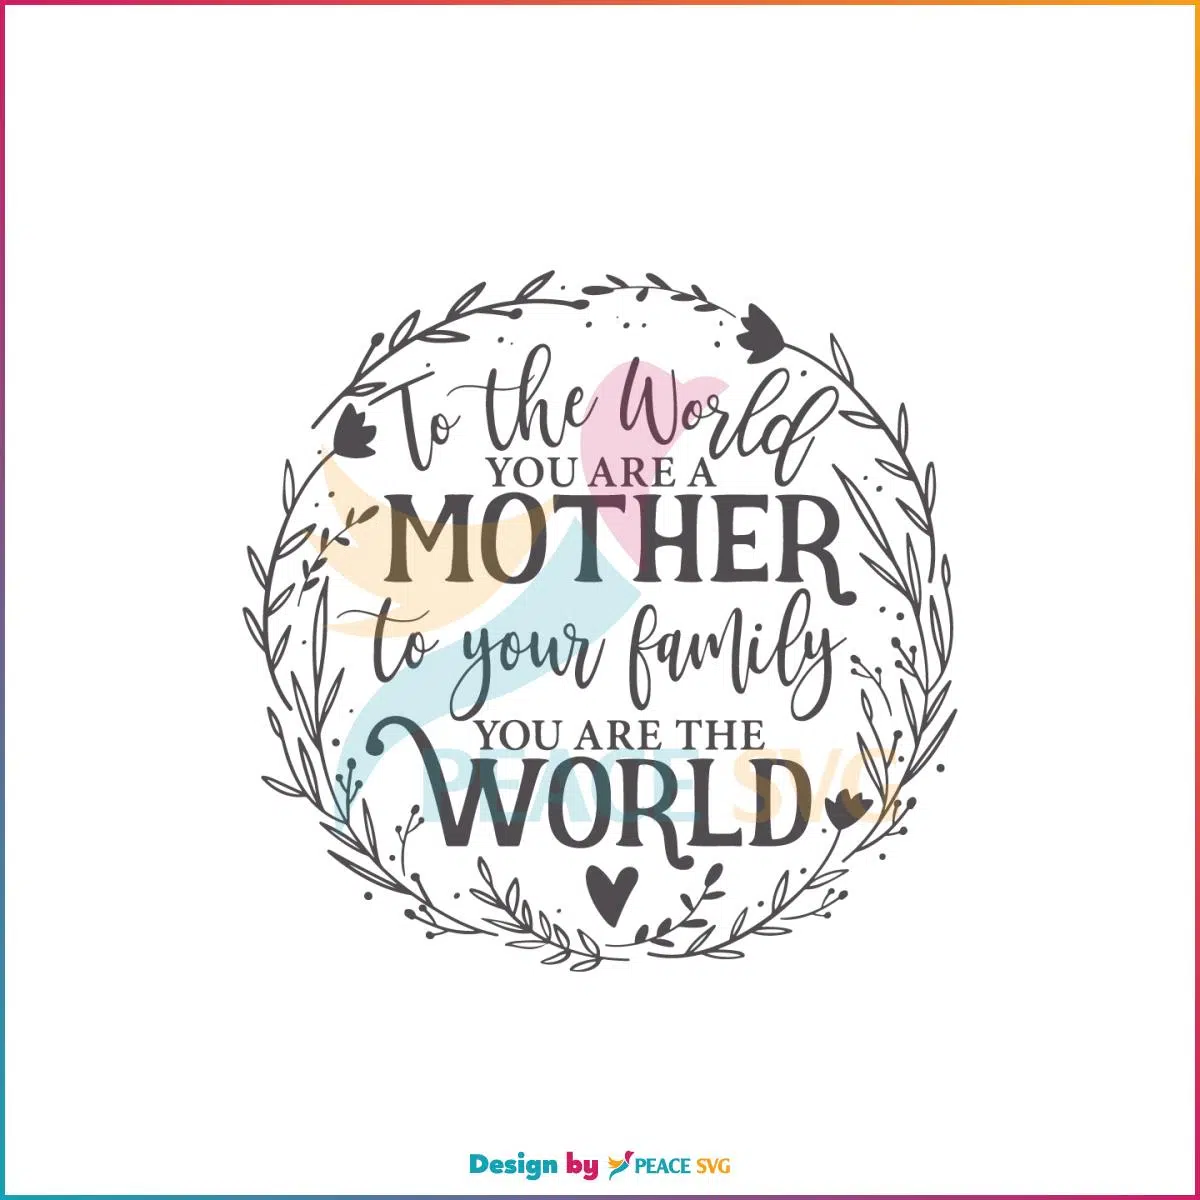 To The World You Are A Mother SVG Mothers Day Wreath Svg